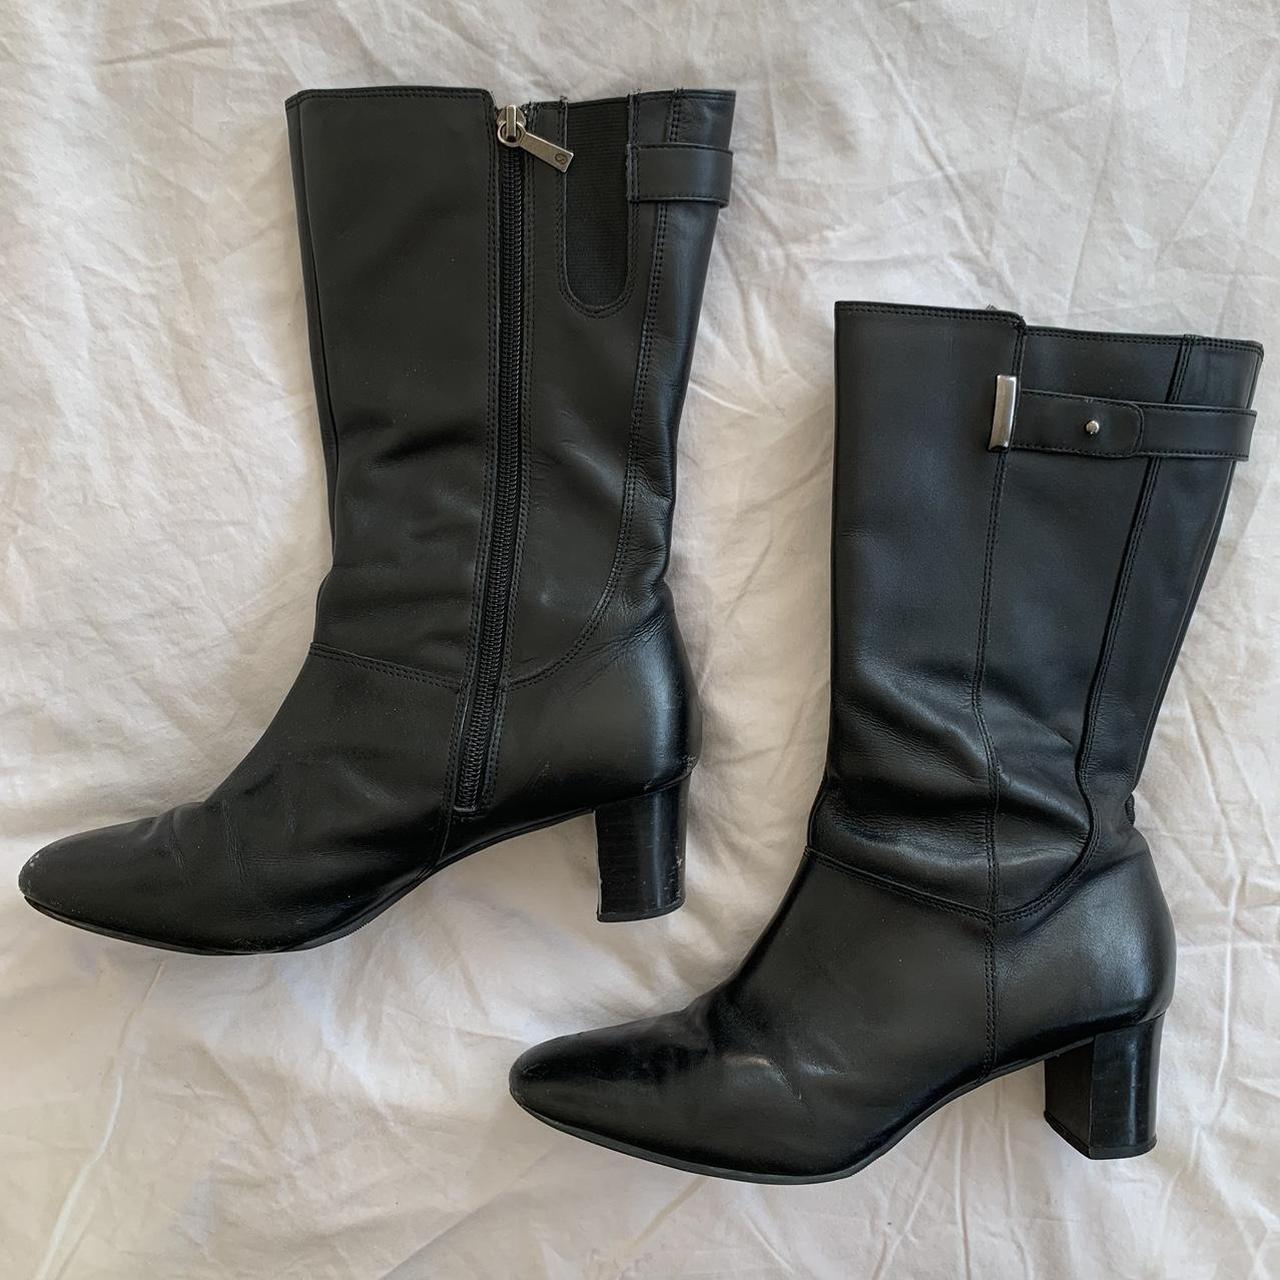 gorgeous mid-calf black leather boots 👢 👢👢 a... - Depop